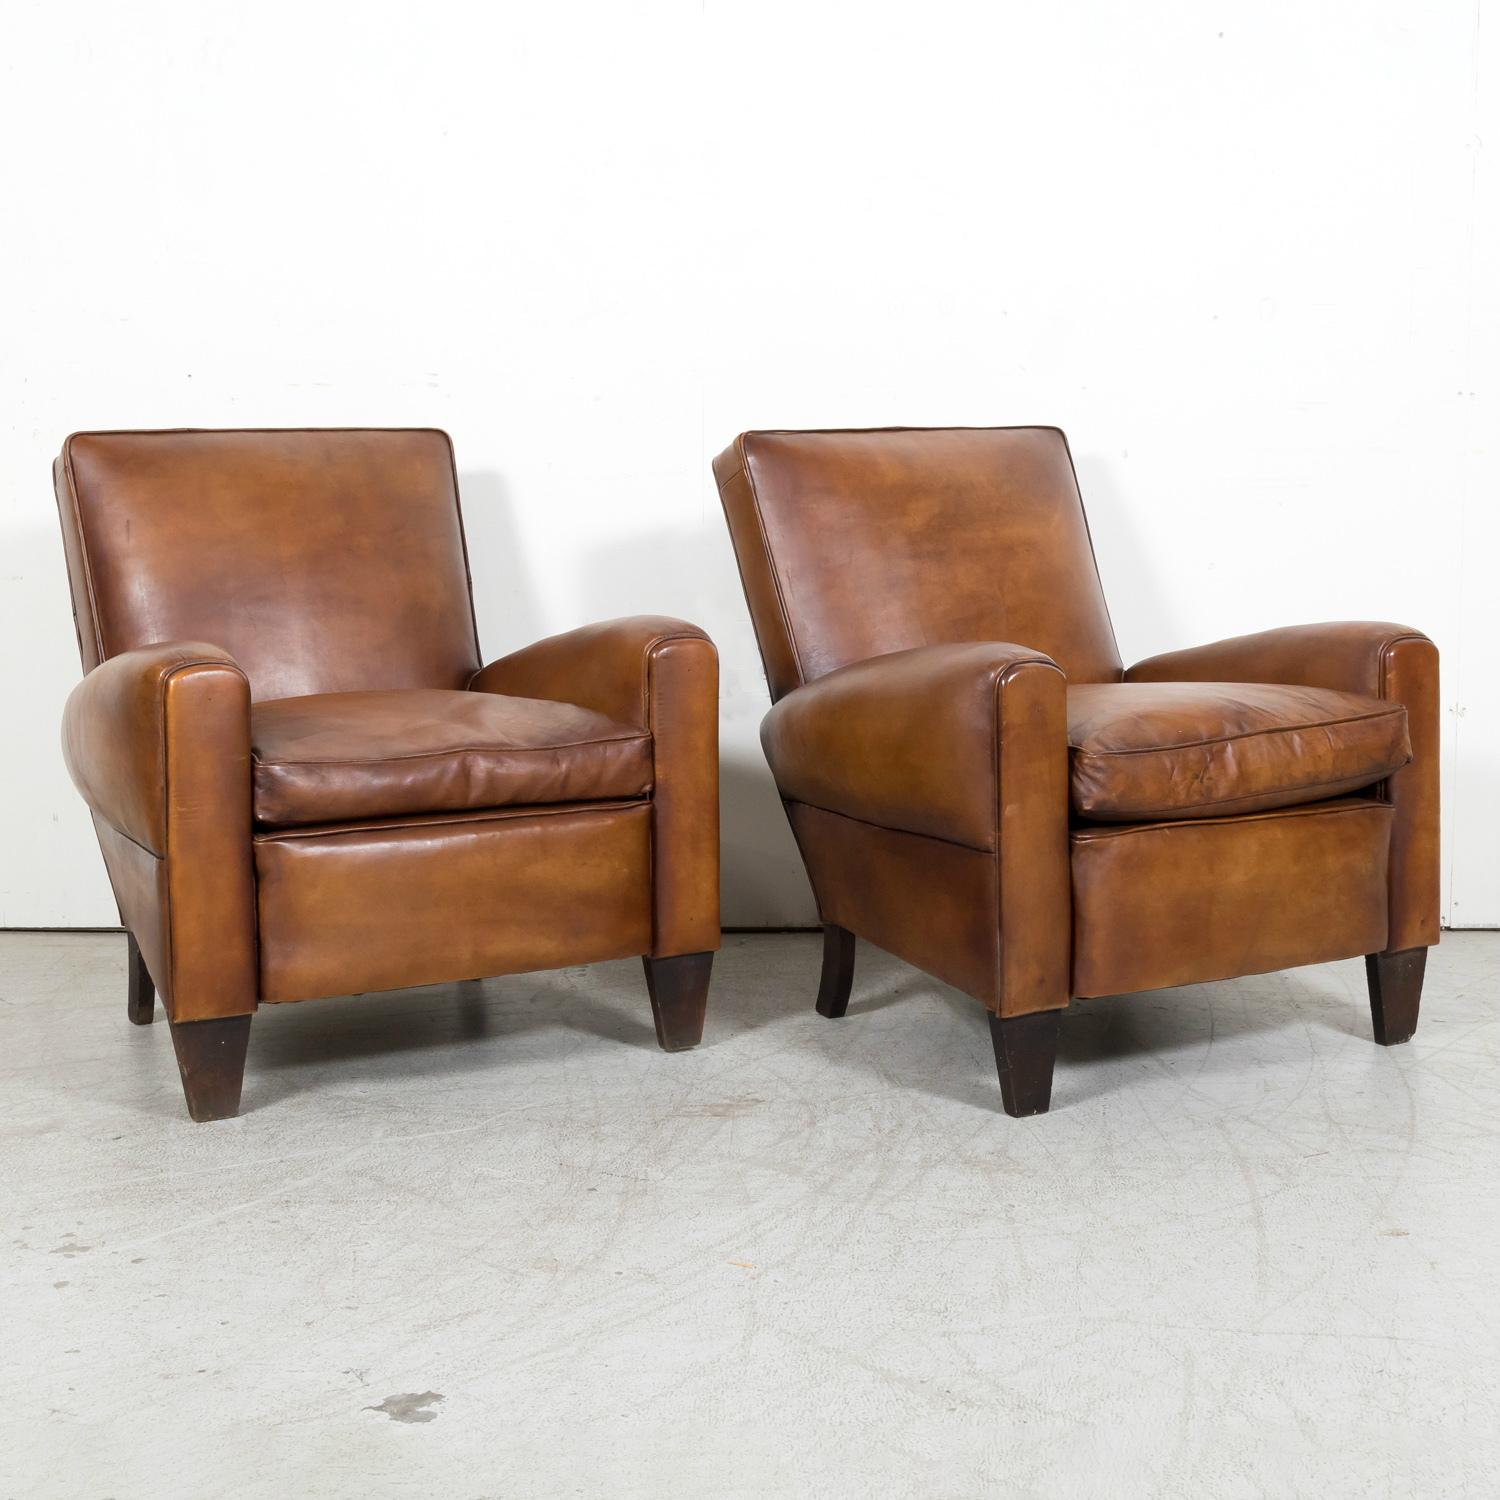 Mid-20th Century 1930s Pair of French Art Deco Period Cognac Leather Club Chairs